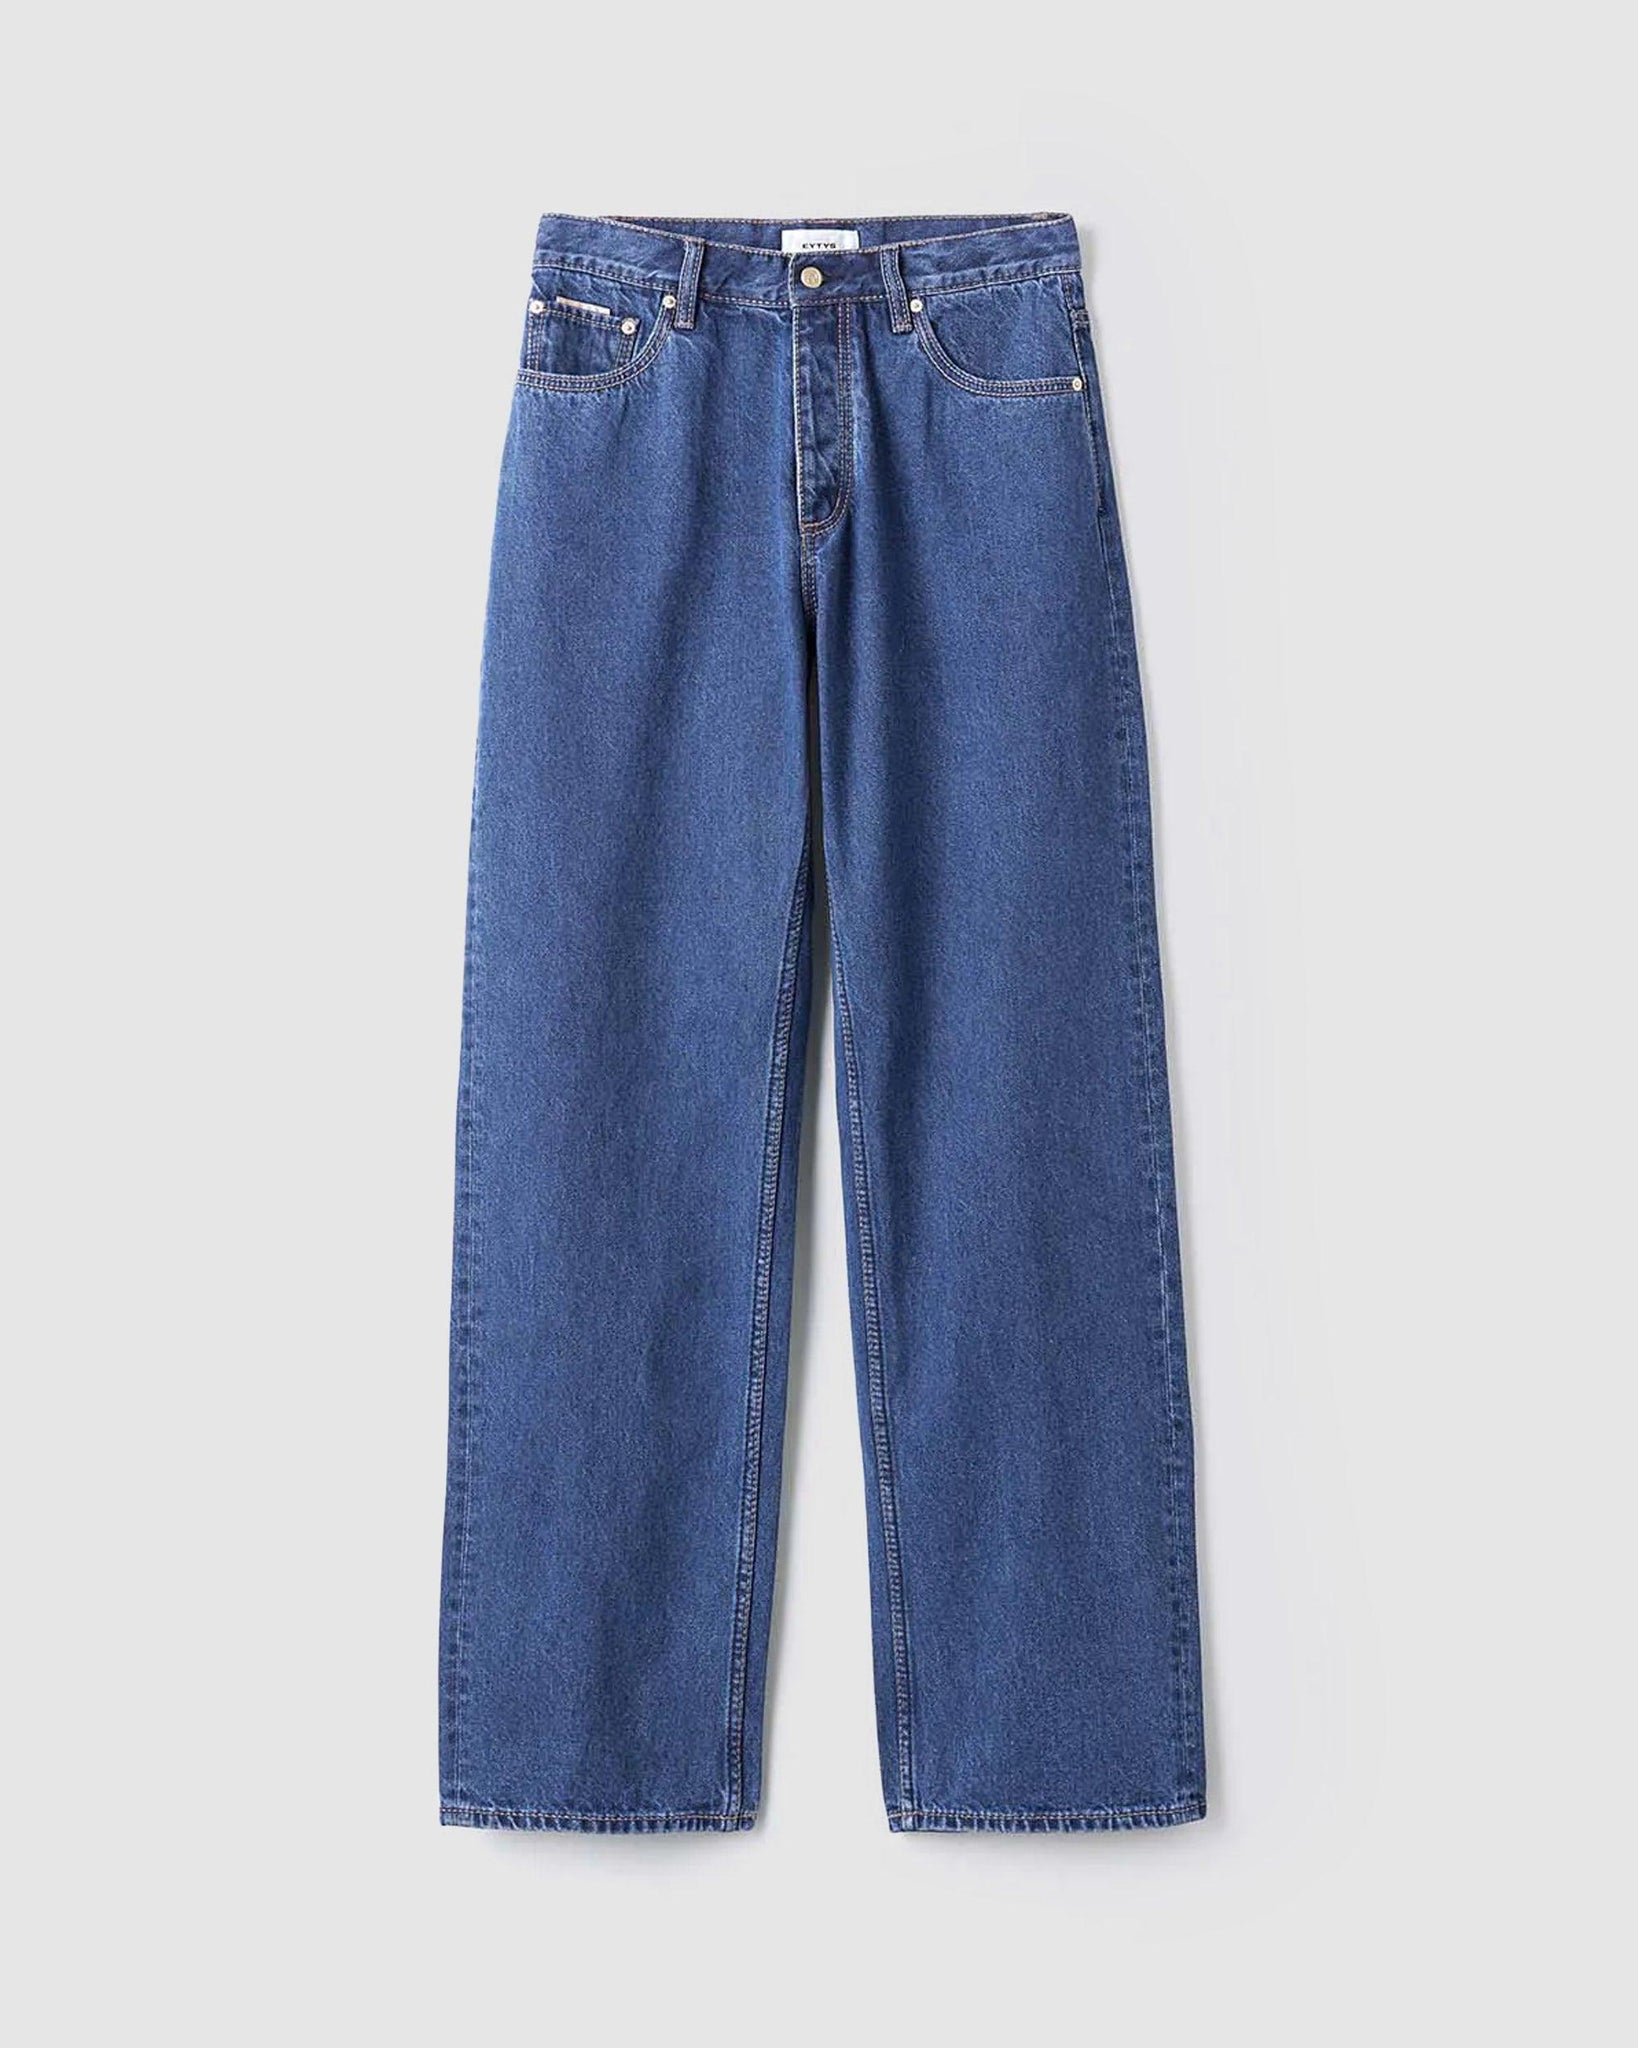 Benz Jean Stone Indigo - {{ collection.title }} - Chinatown Country Club 